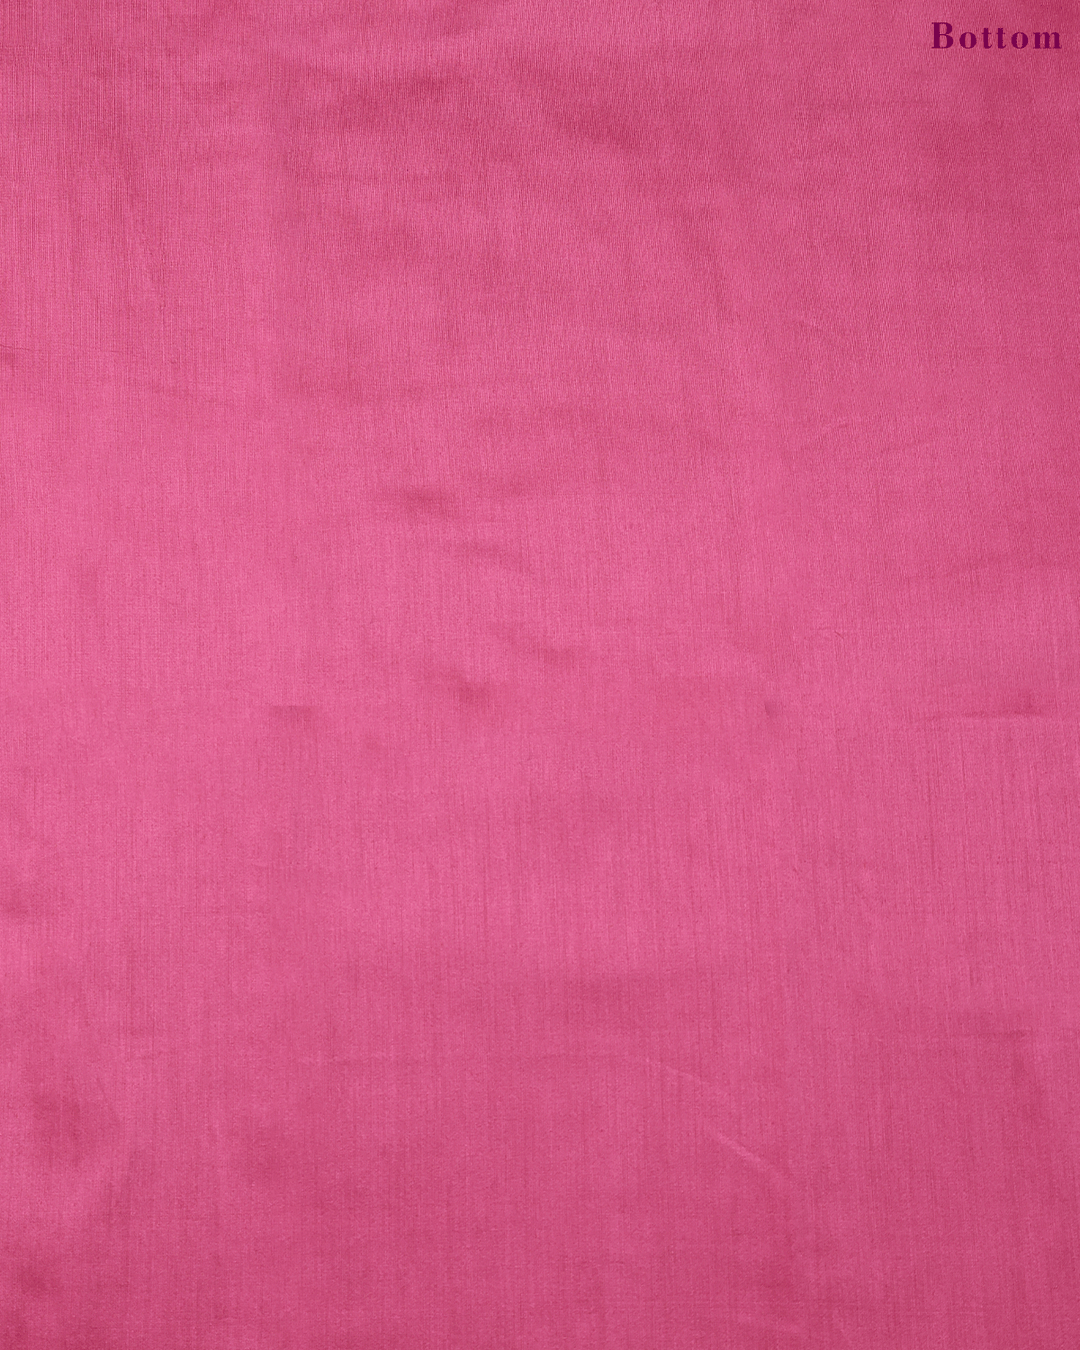 Rose Pink Unstitched Chudidhar Material - C4243 - View 5